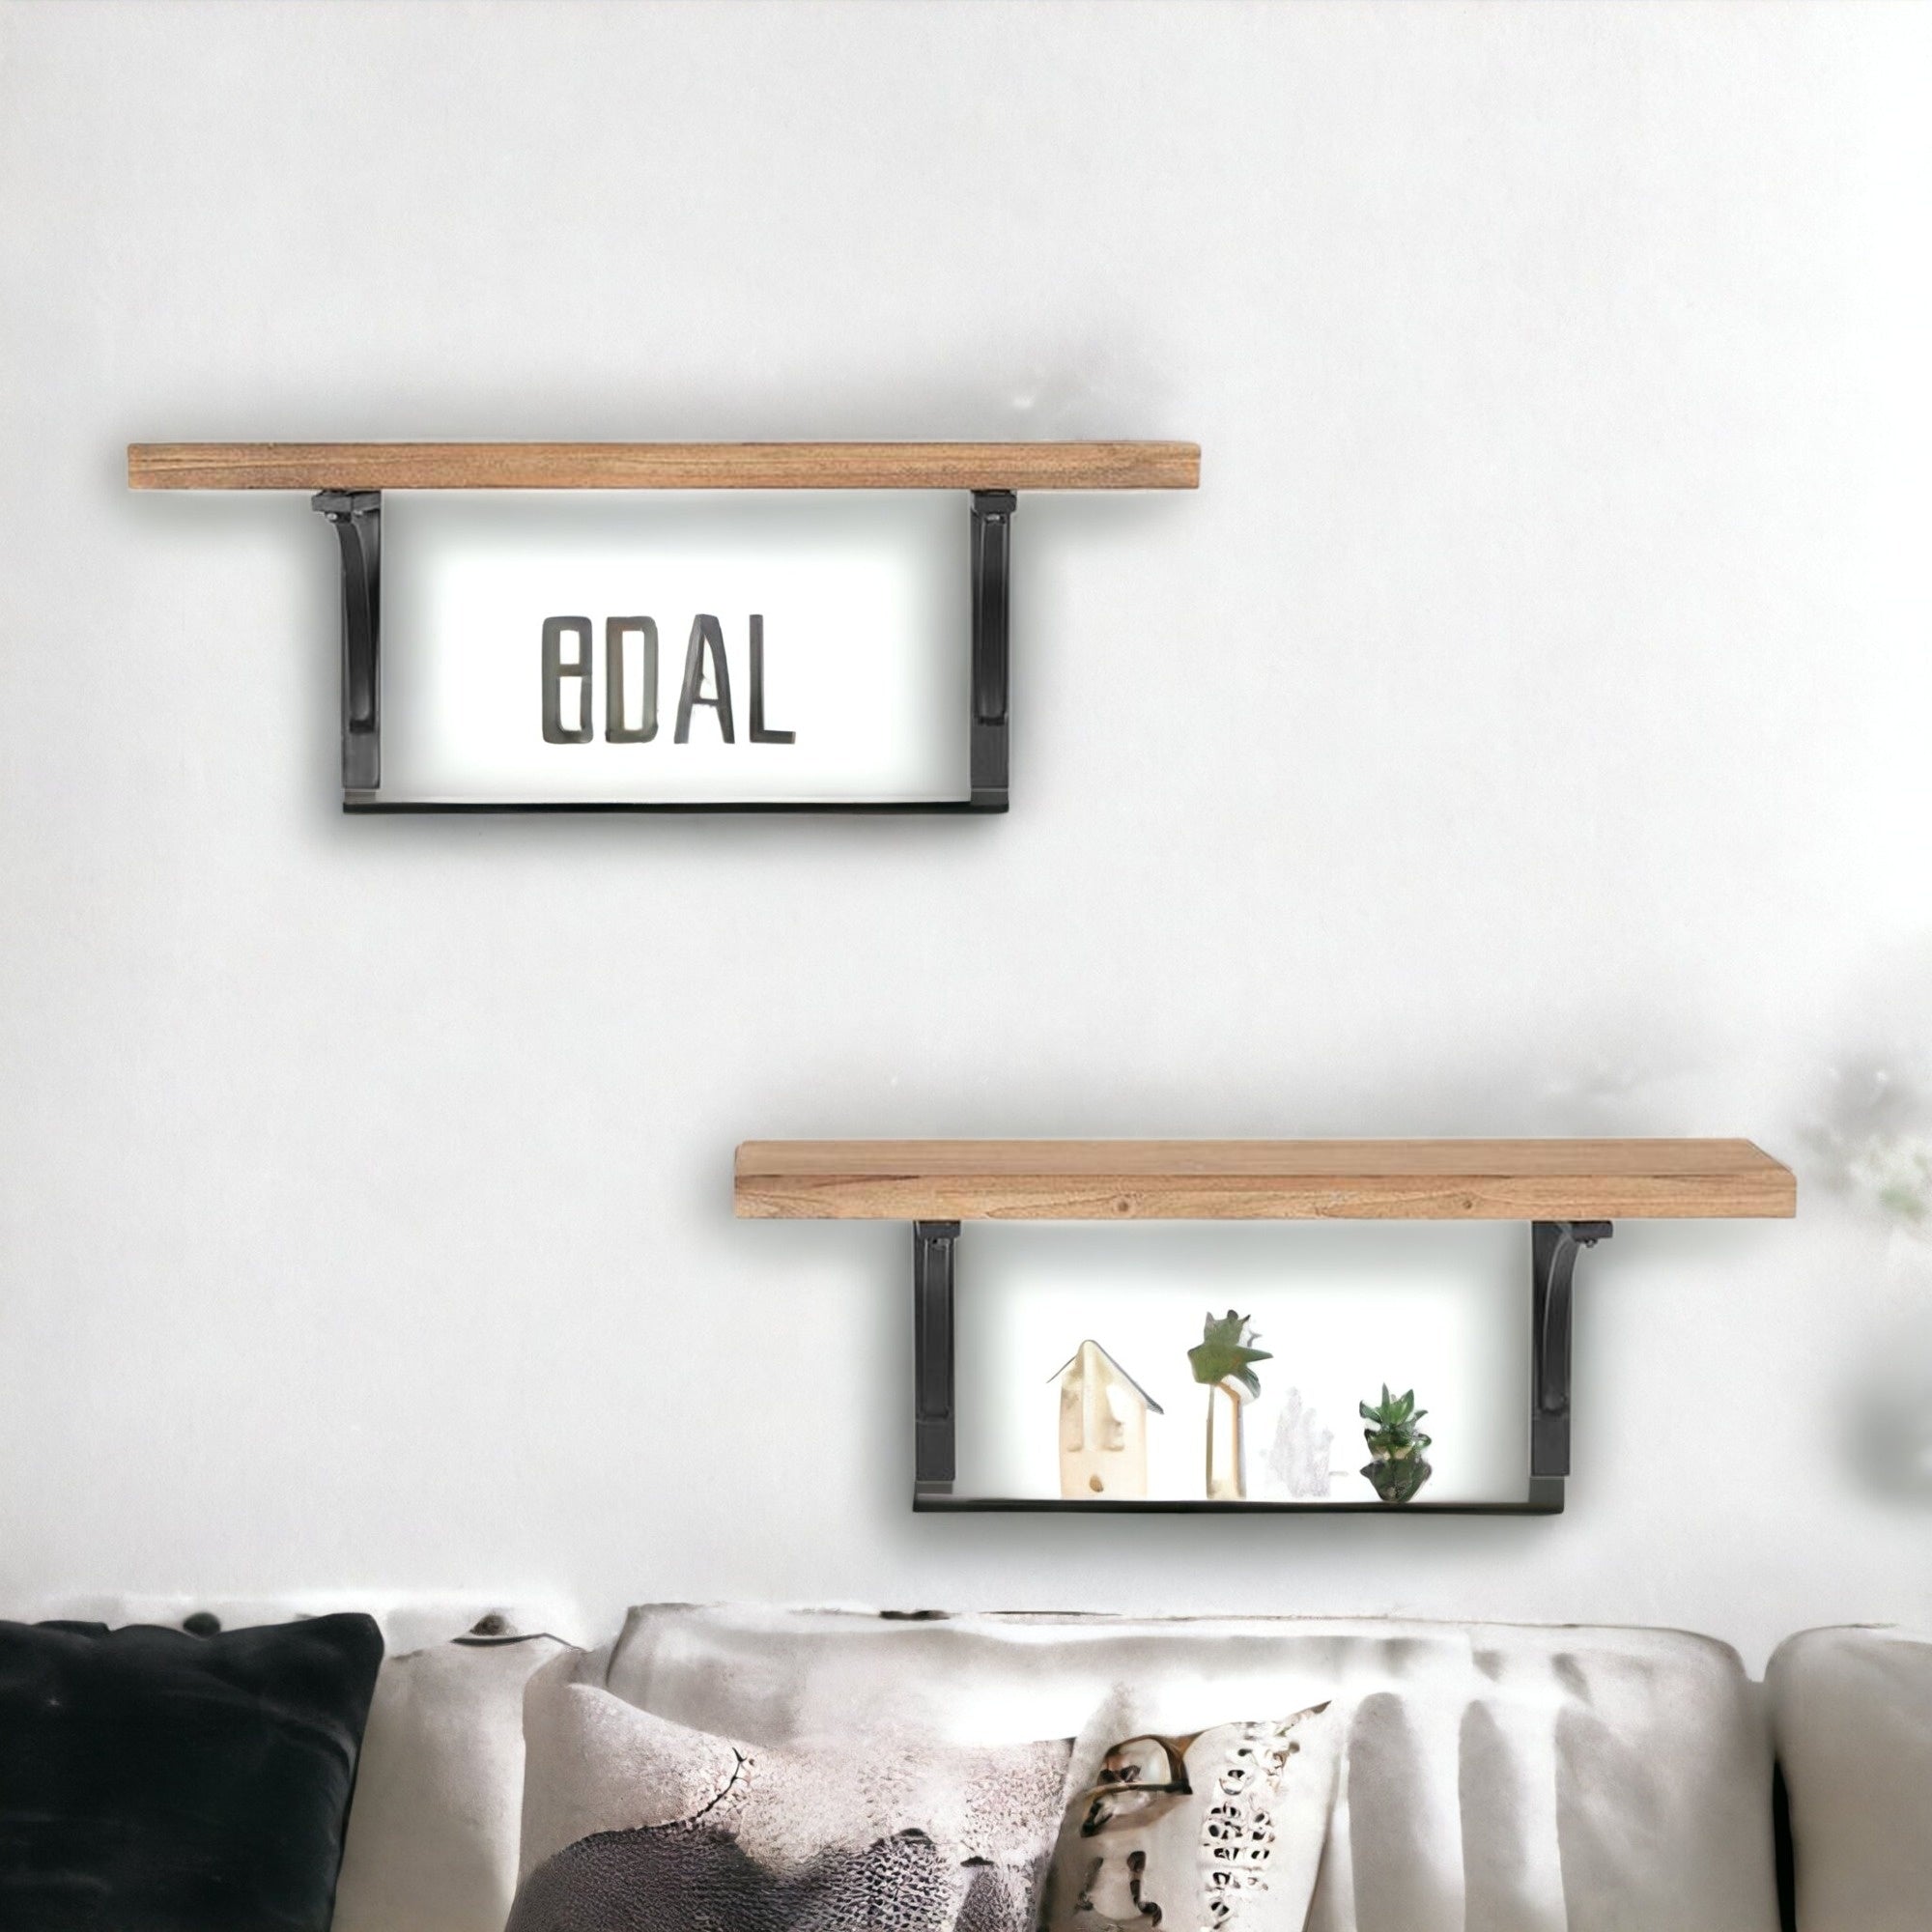 24" Two Shelves Solid Wood Wall Mounted Shelving Unit